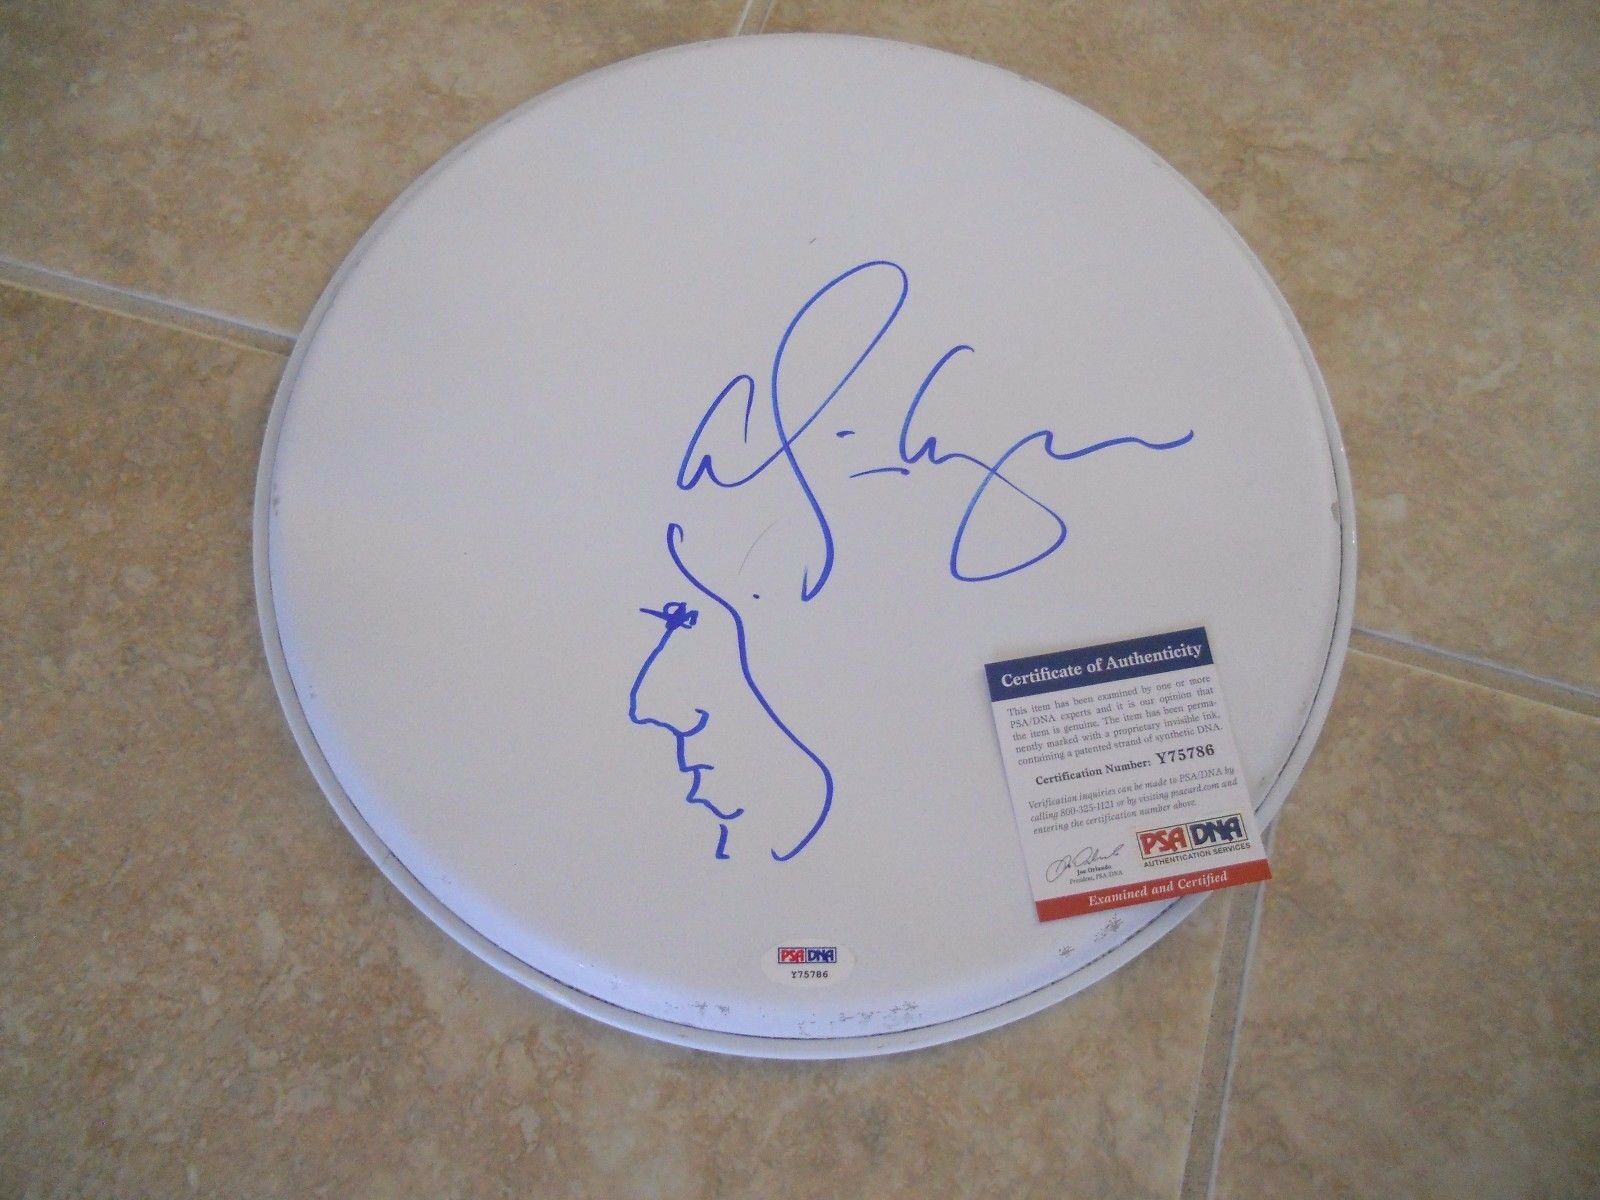 Alice Cooper Signed Autographed Psa Certified 13" Drumhead W/ Hand Drawn Sketch